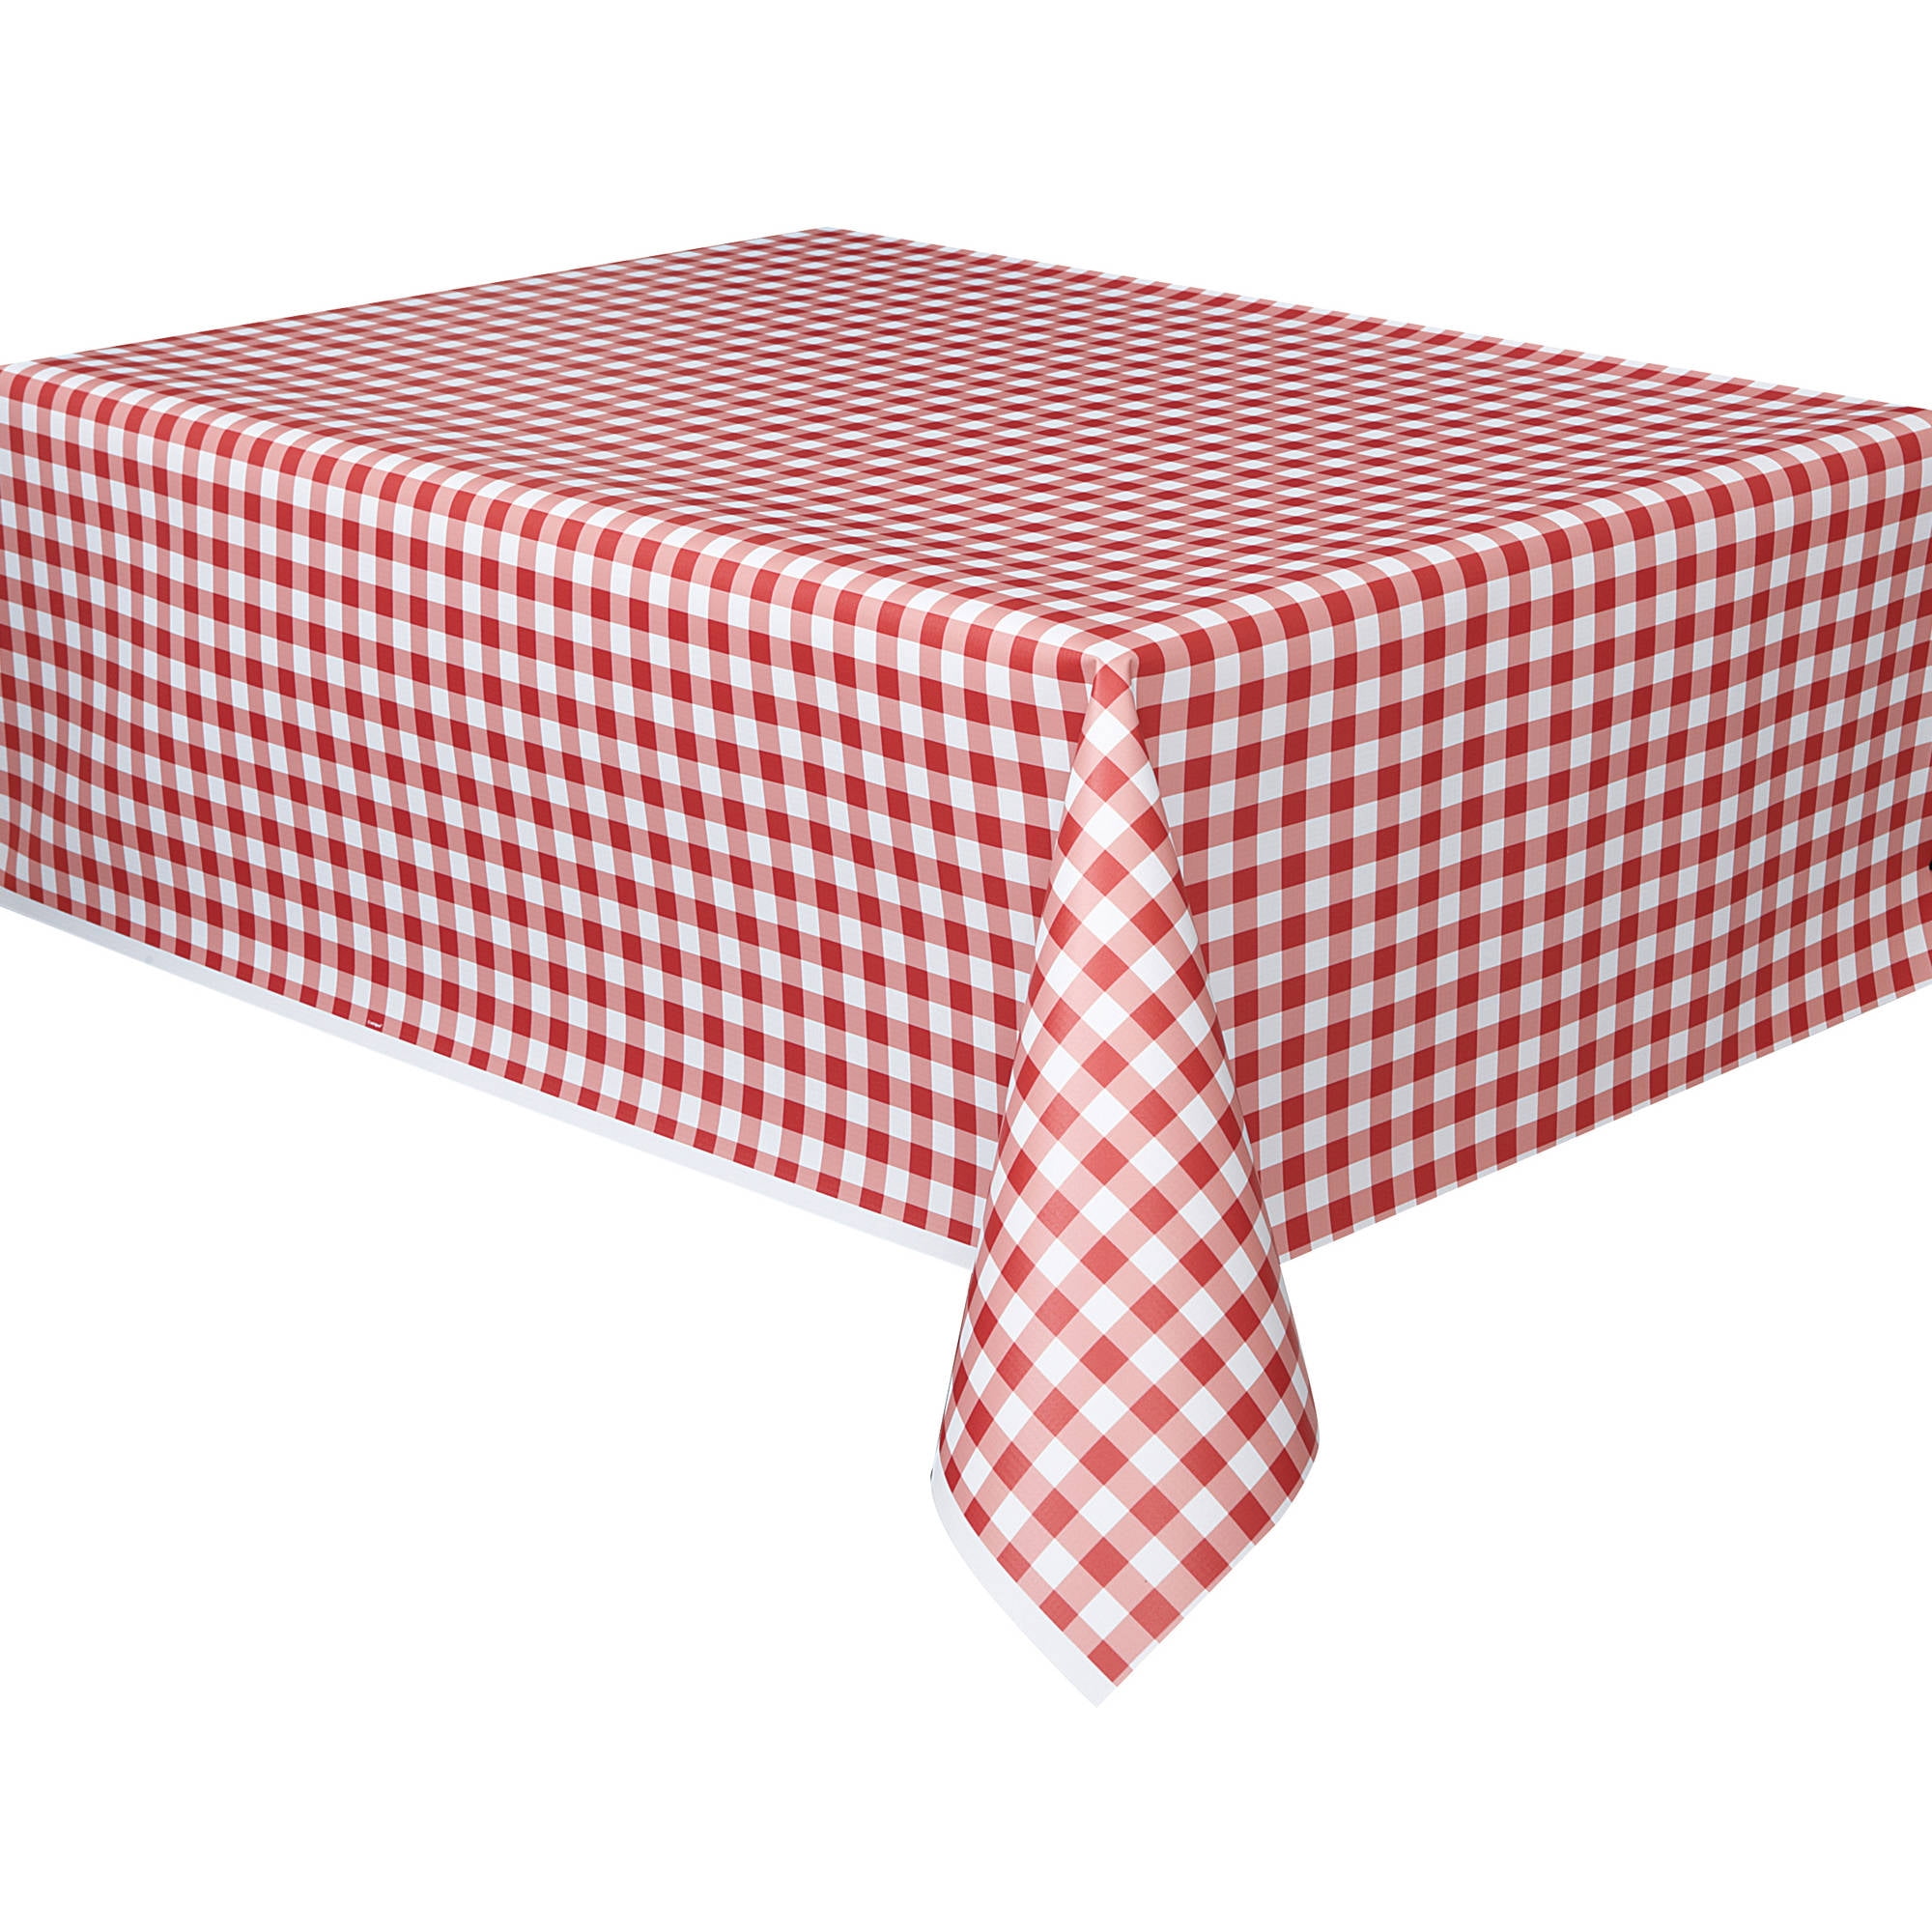 Tablecloth Cat Read Book How to Train Your Human Tablecloth for Kitchen Dinning Tabletop Outdoor Picnic Rectangle 54 X 72 Inch 